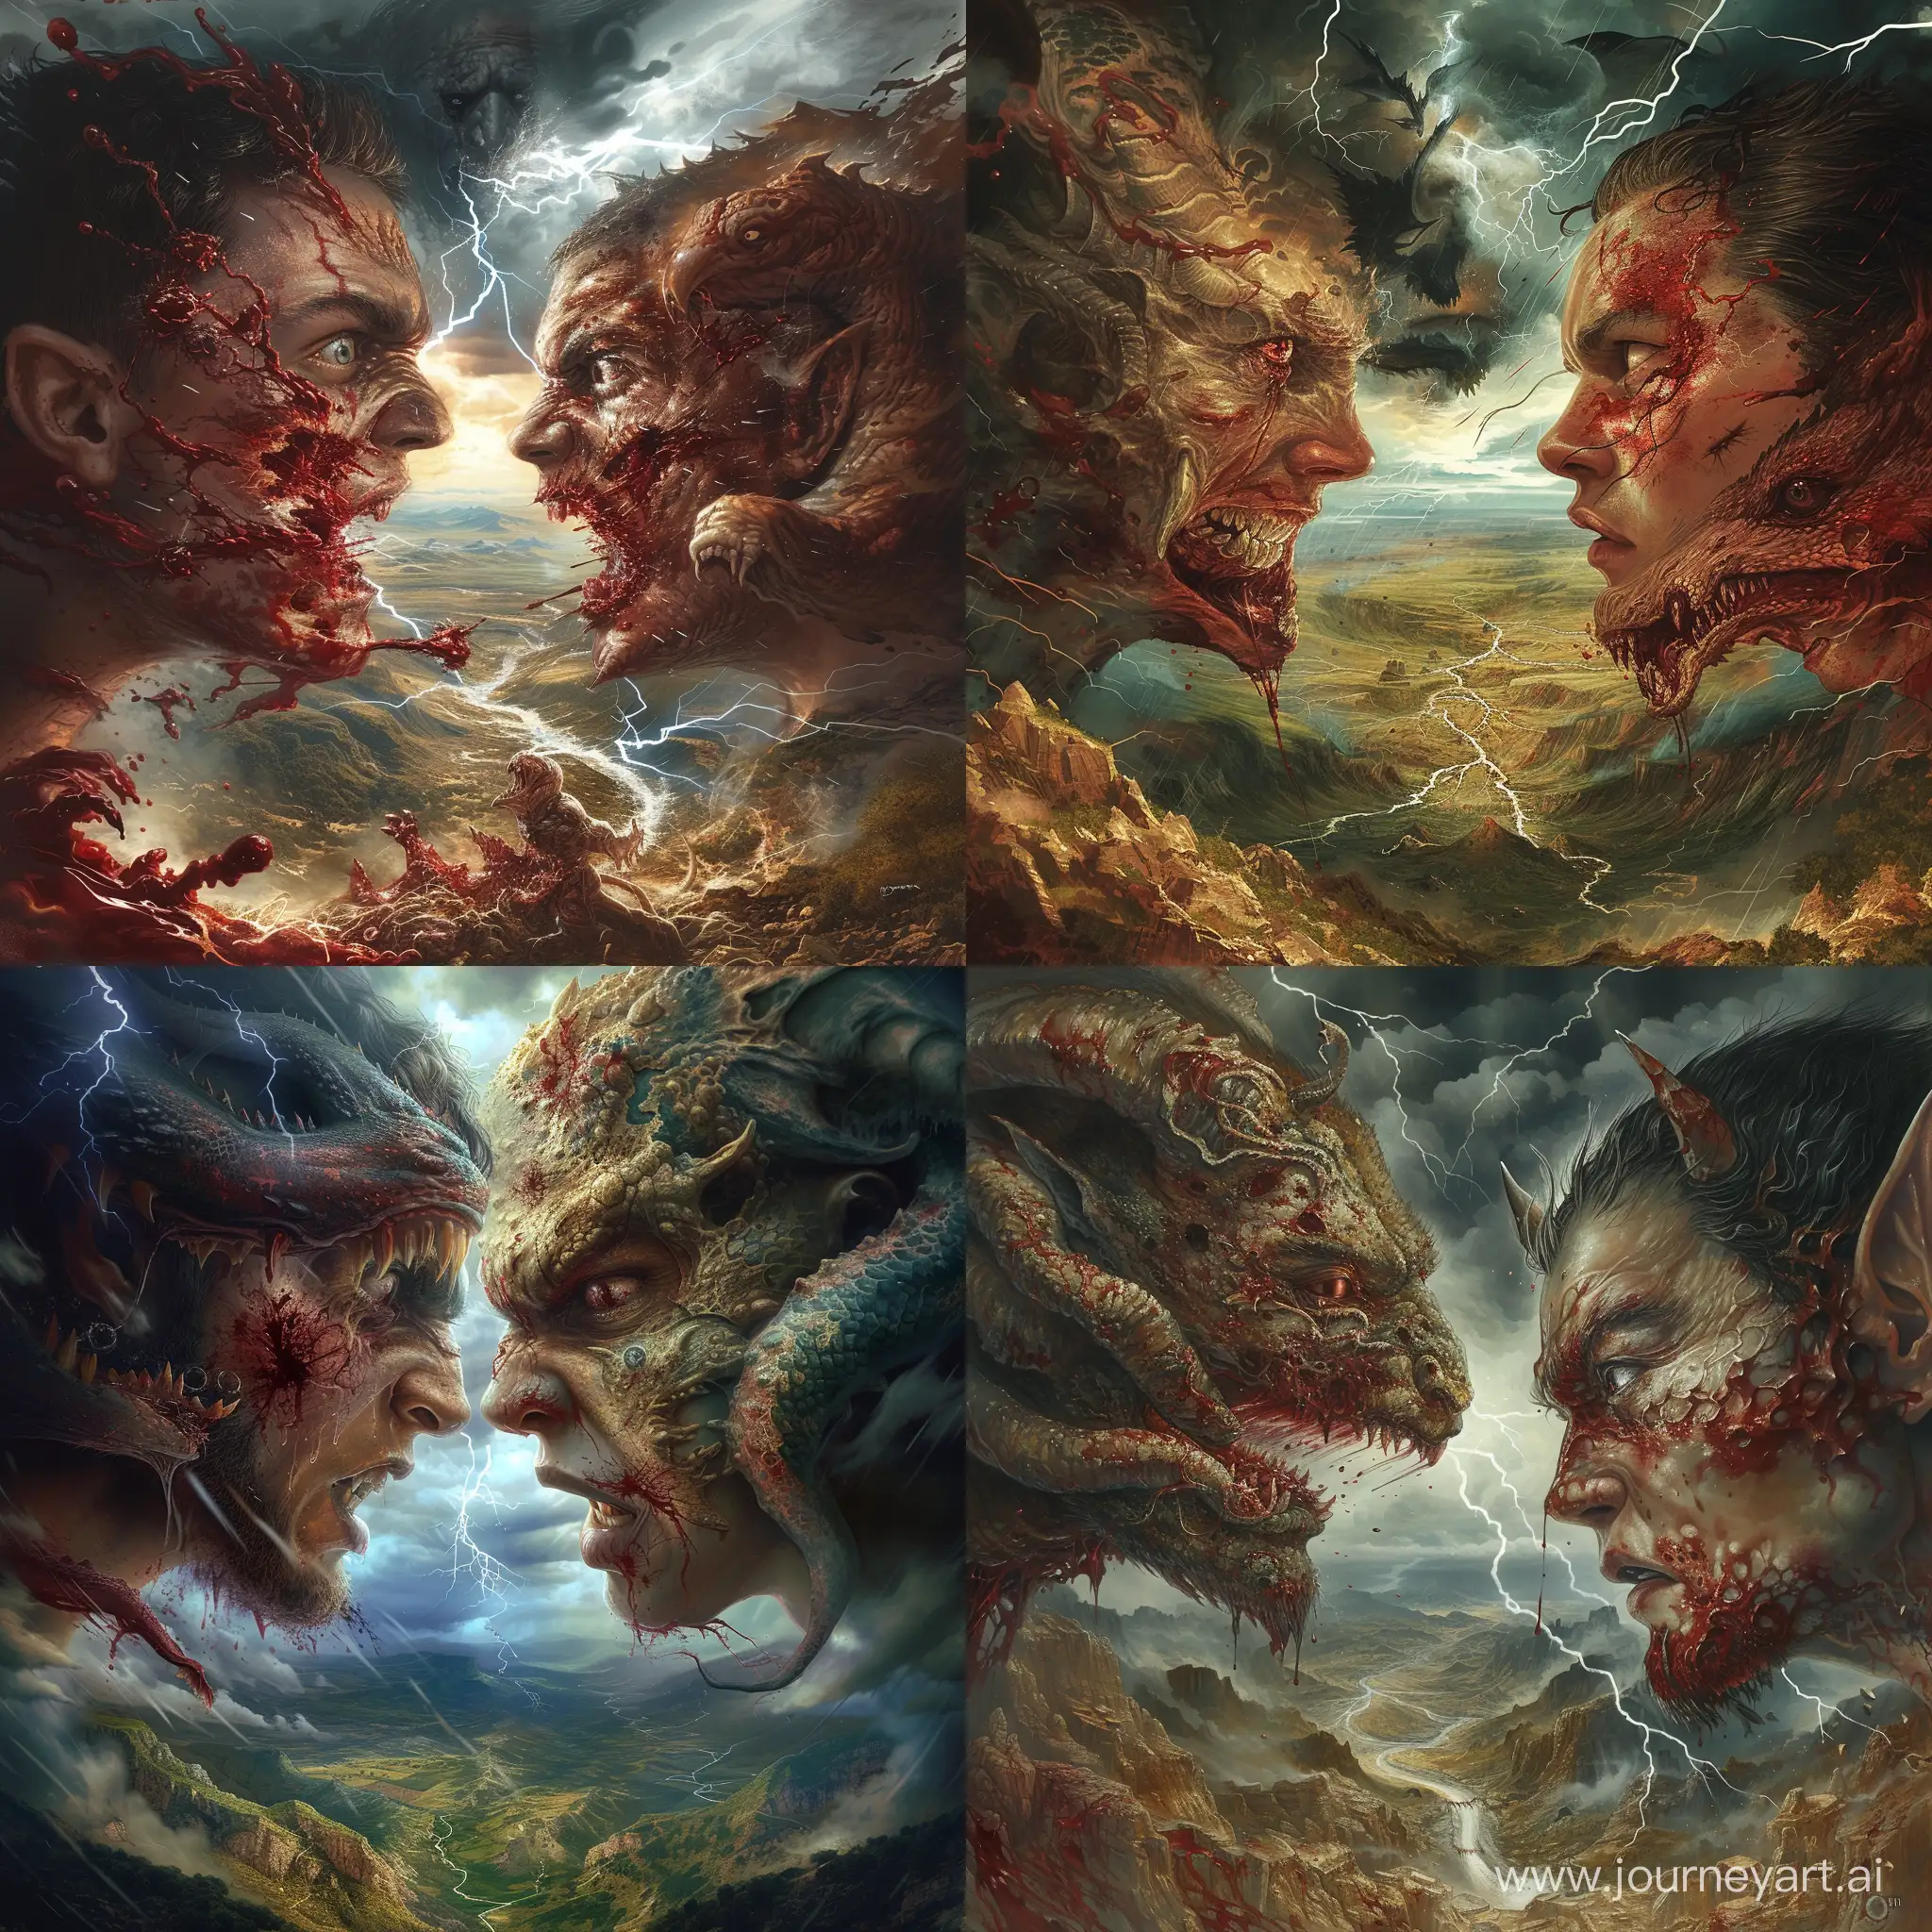 An image depicting two man individuals engaged in a battle with a chimera. The faces are confronting each other, covered in blood. The background reveals a vast valley, with a dark and stormy sky featuring thunder and lightning.